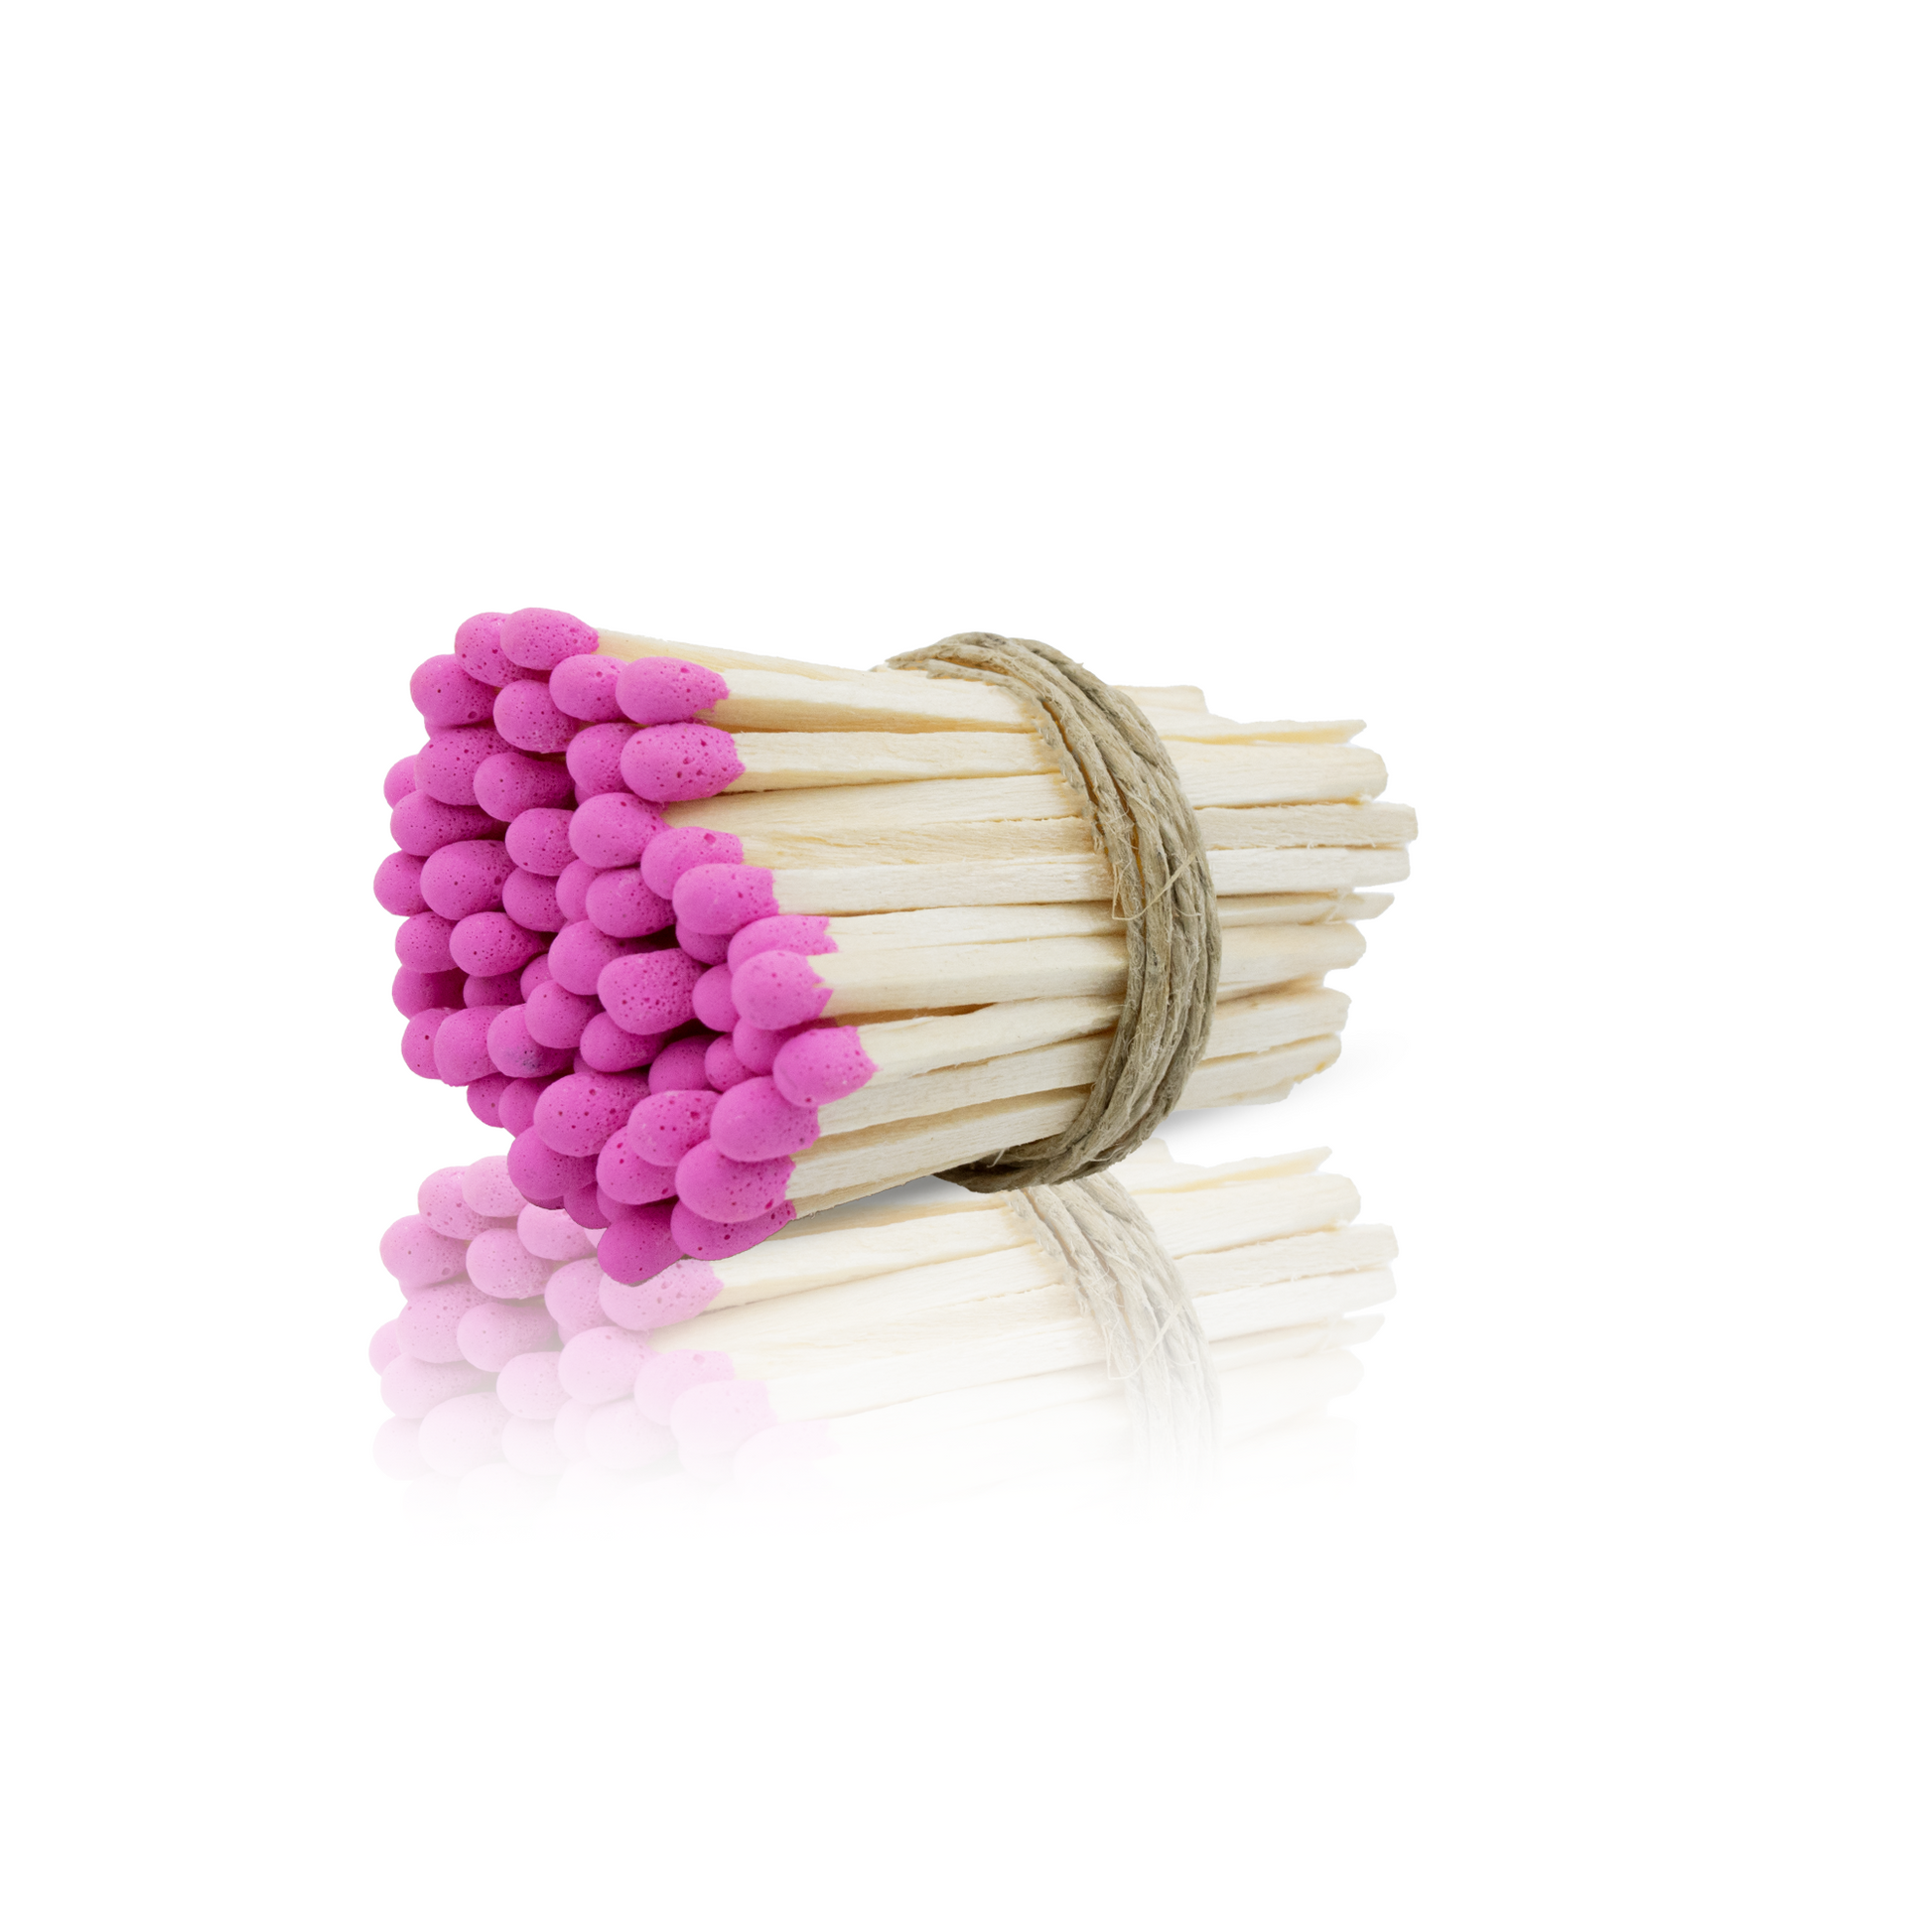 2 Inch Size Refill Wooden Matches Color Tip Matches in Your Choice